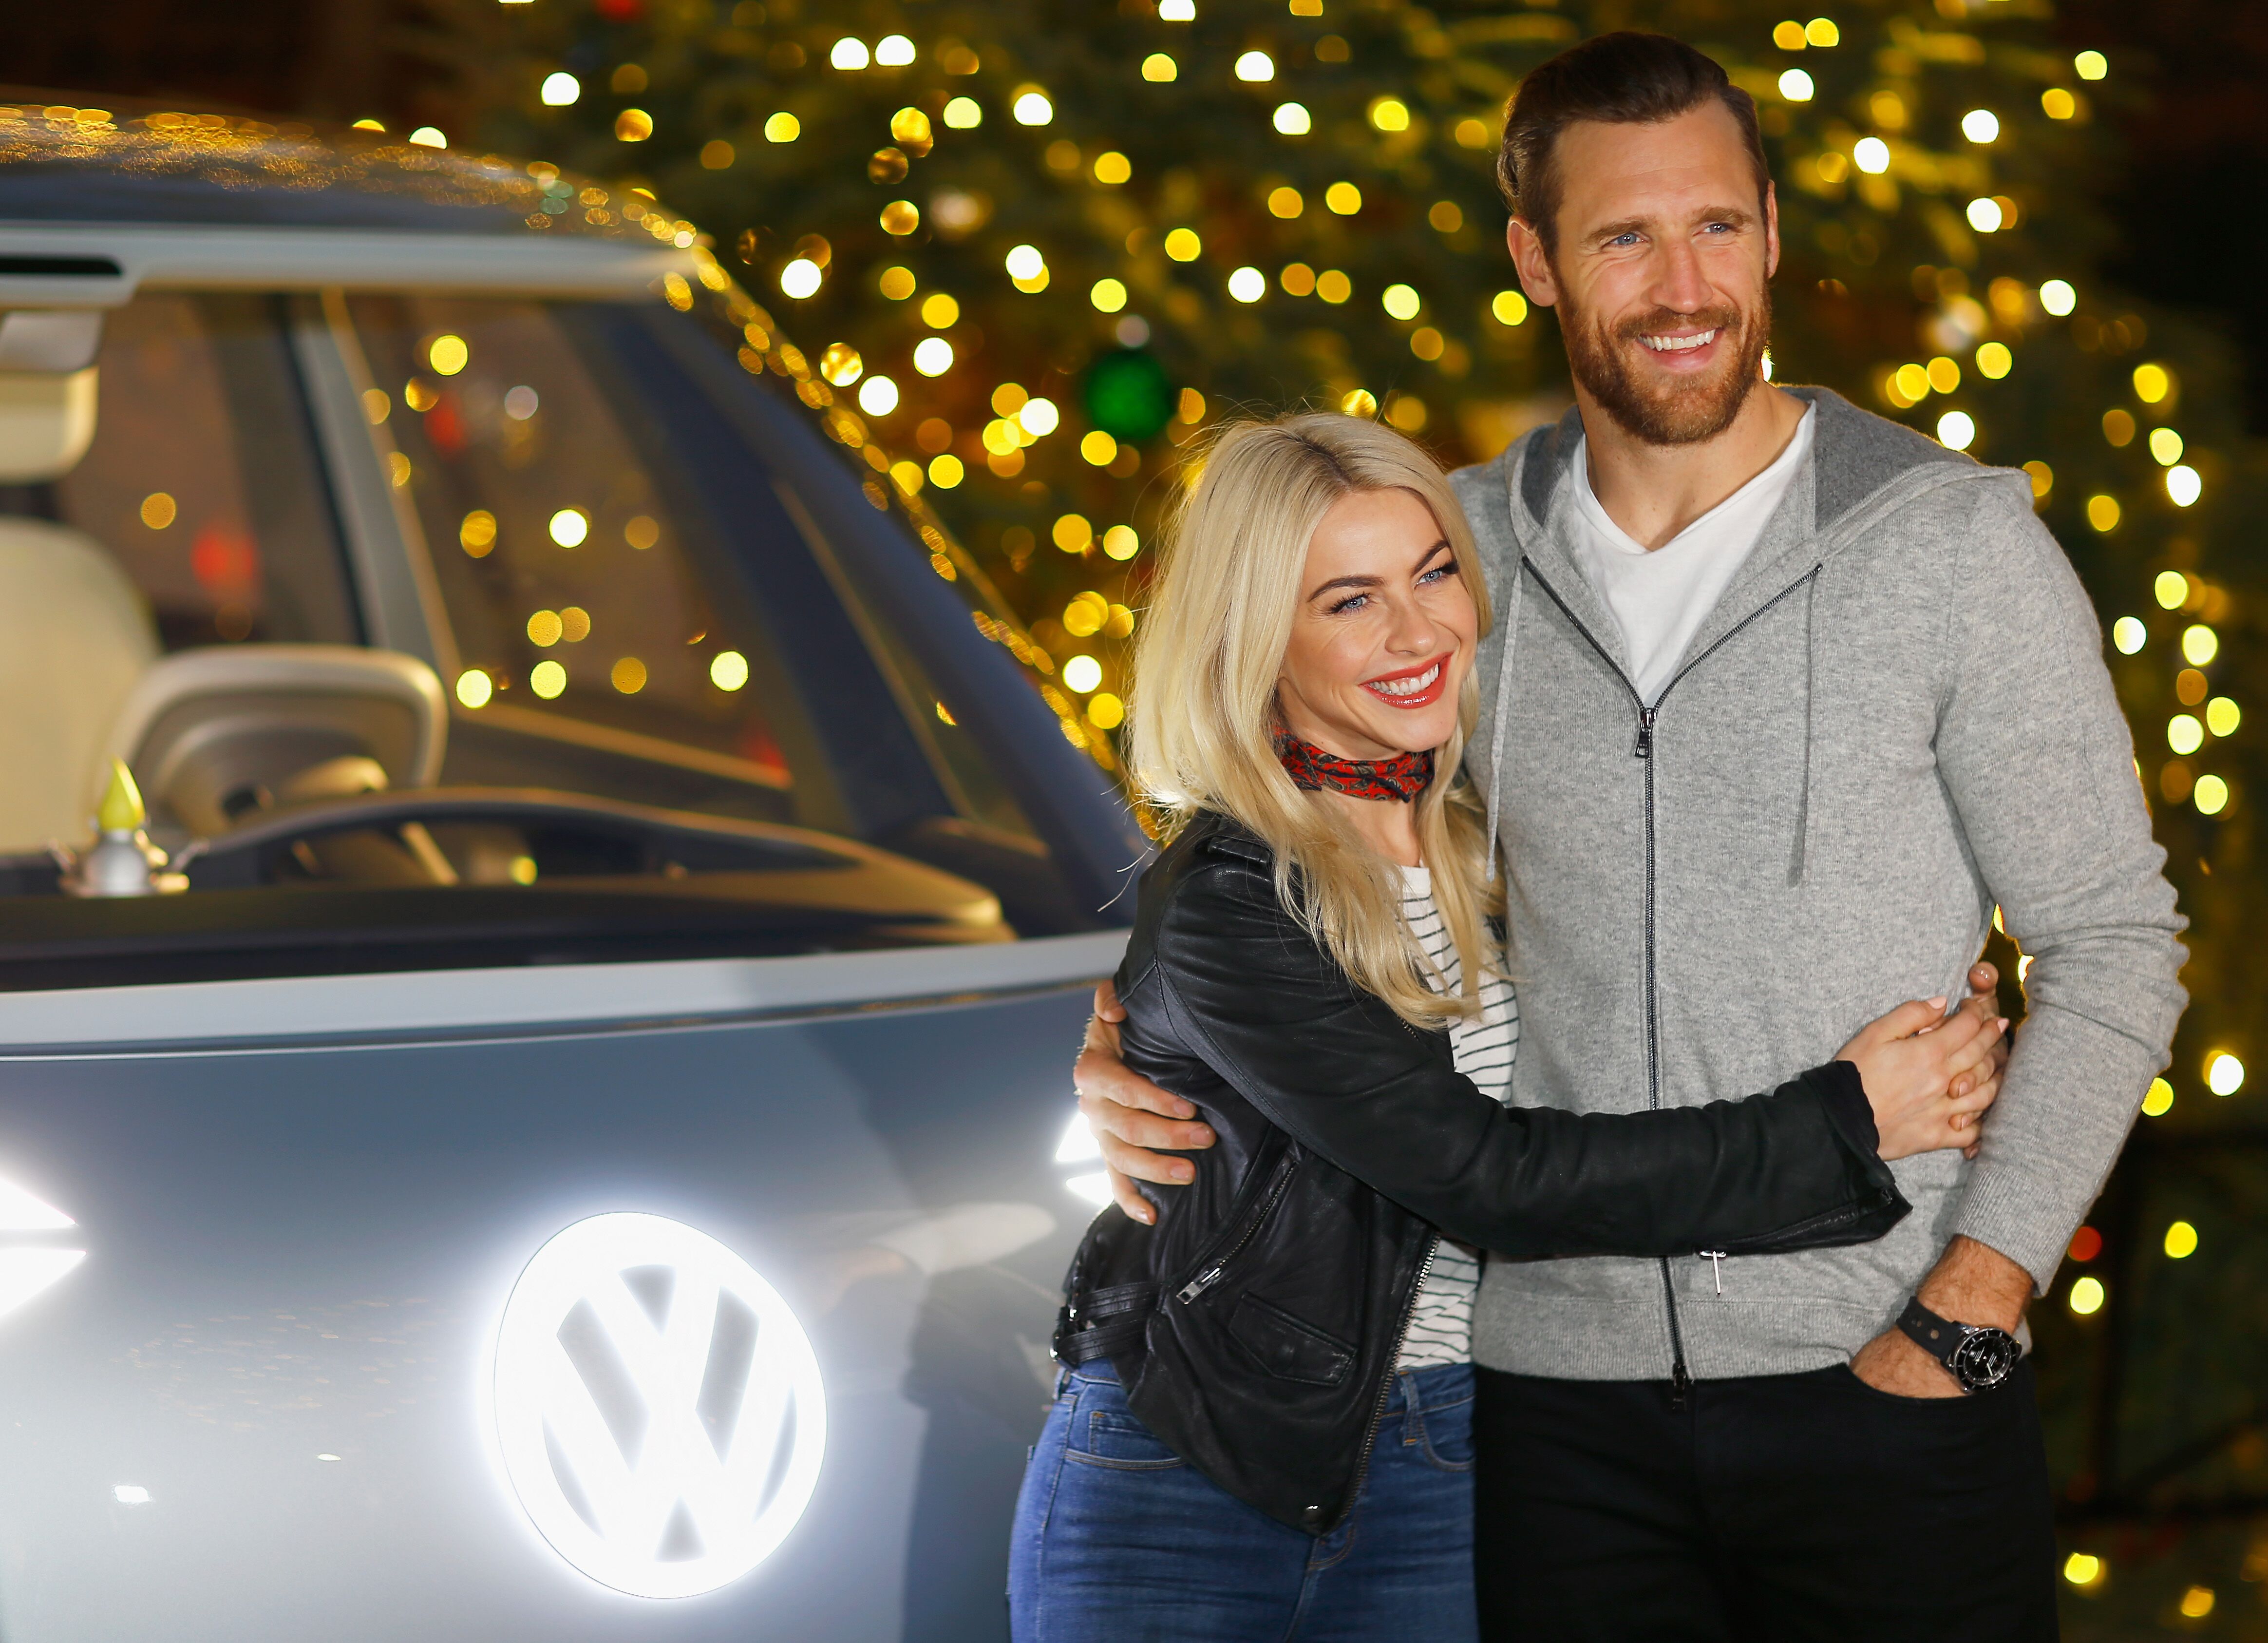 Julianne Hough and Brooks Laich at the Volkswagen Holiday Drive-In Event in Los Angeles, California on December 16, 2017 | Photo: Justin Edmonds/Getty Images